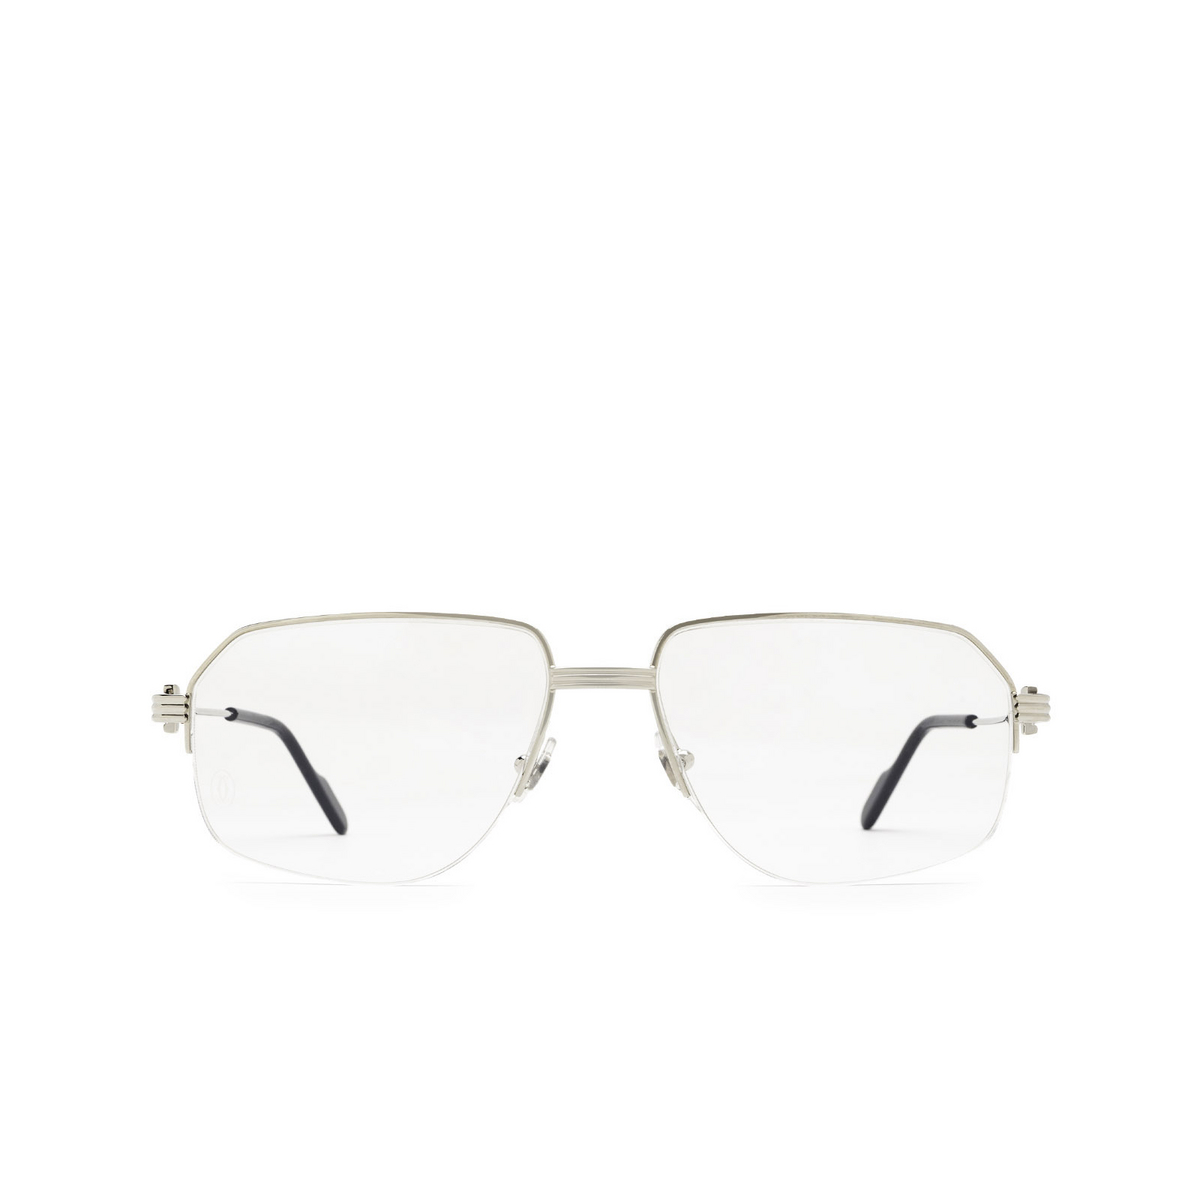 Cartier CT0285O Eyeglasses 001 Silver - front view